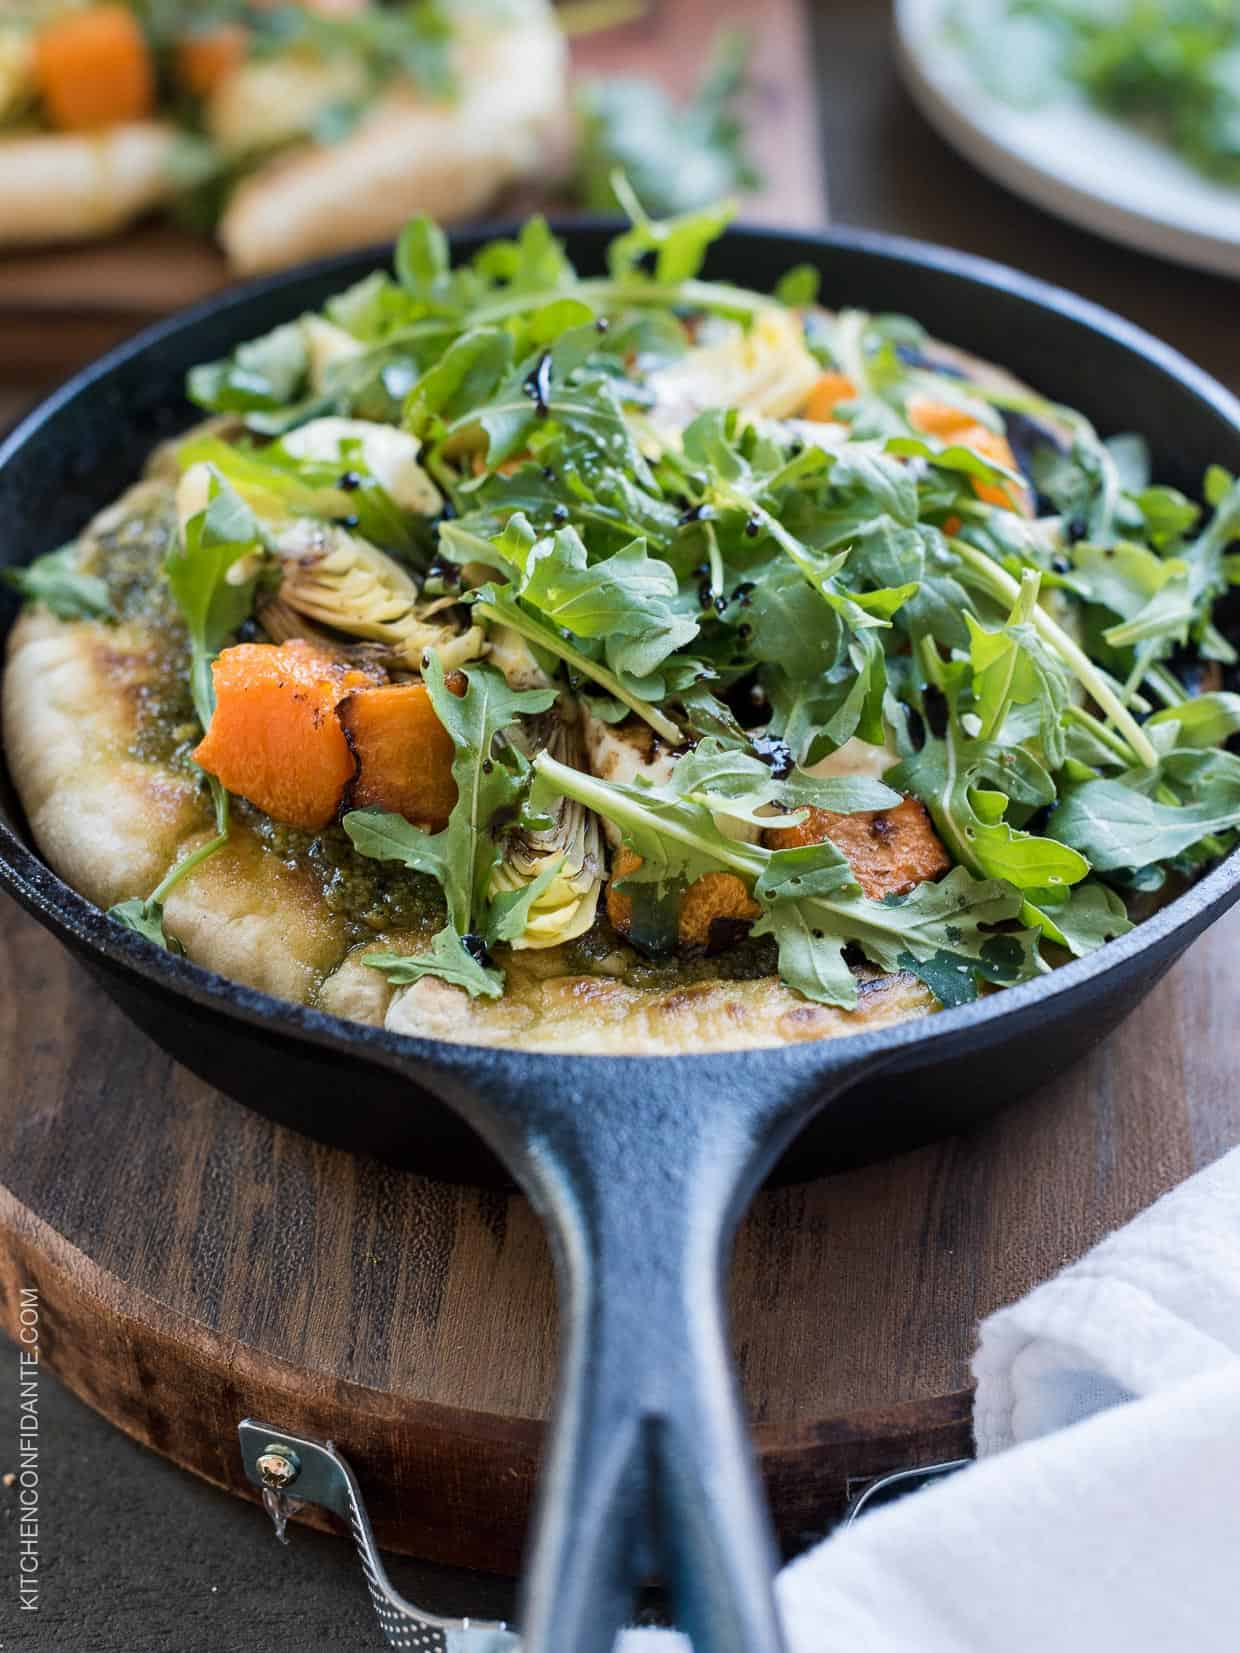 Cast iron skillet filled with Skillet Pesto Flatbread with Goat Cheese, Artichokes and Roasted Butternut Squash.